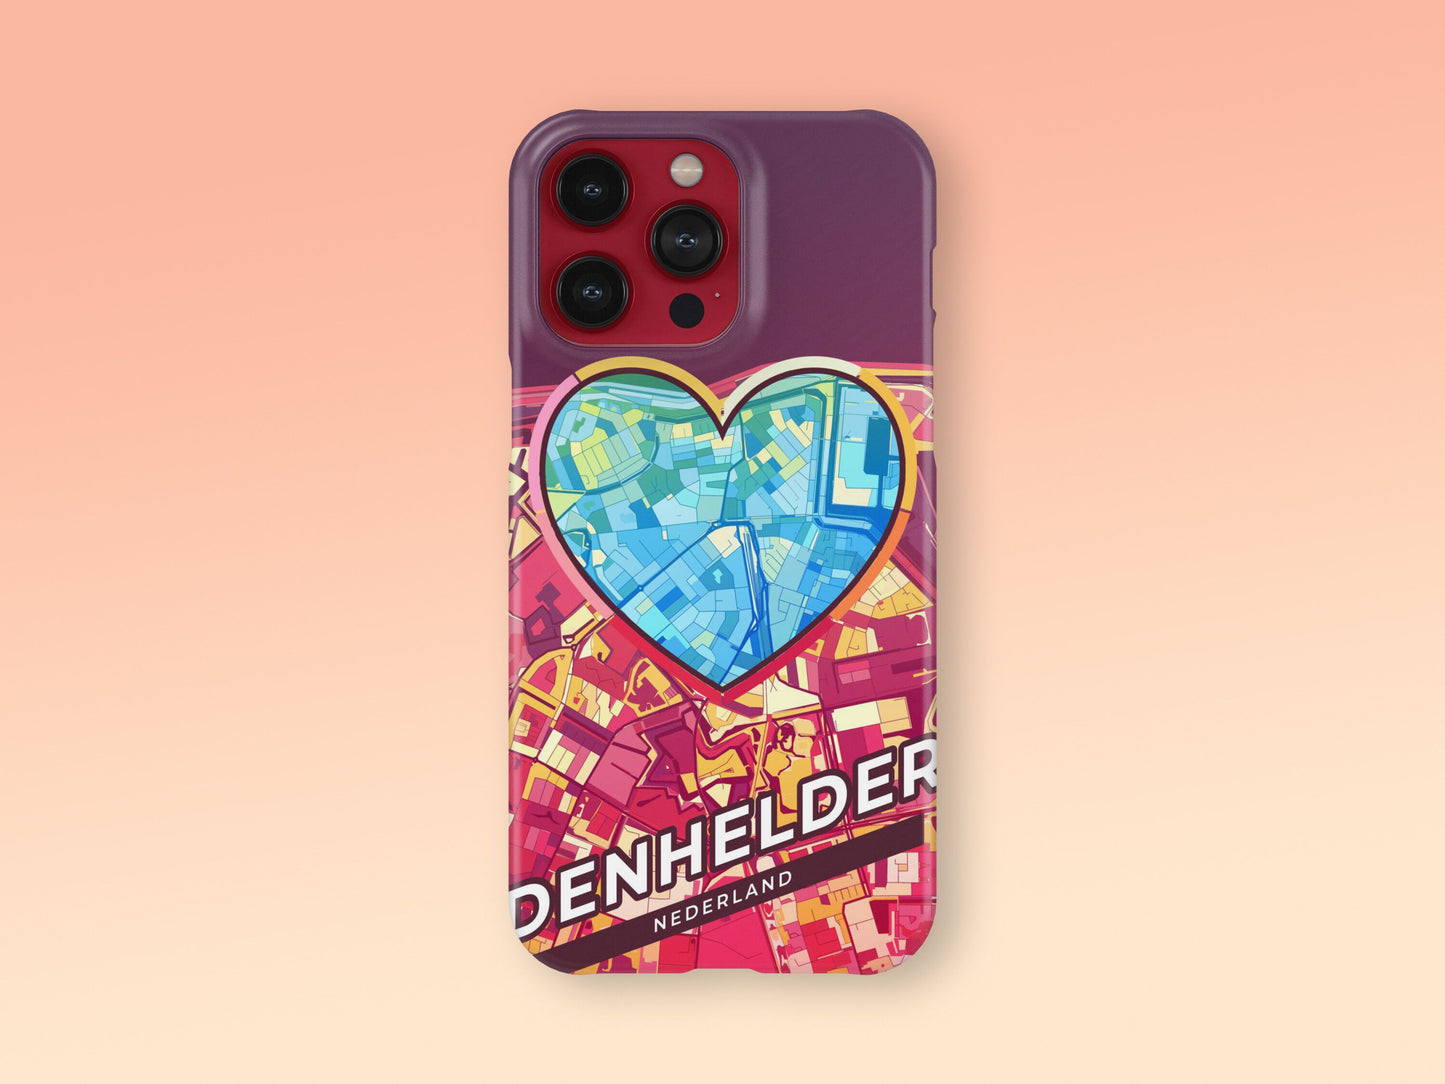 Den Helder Netherlands slim phone case with colorful icon. Birthday, wedding or housewarming gift. Couple match cases. 2